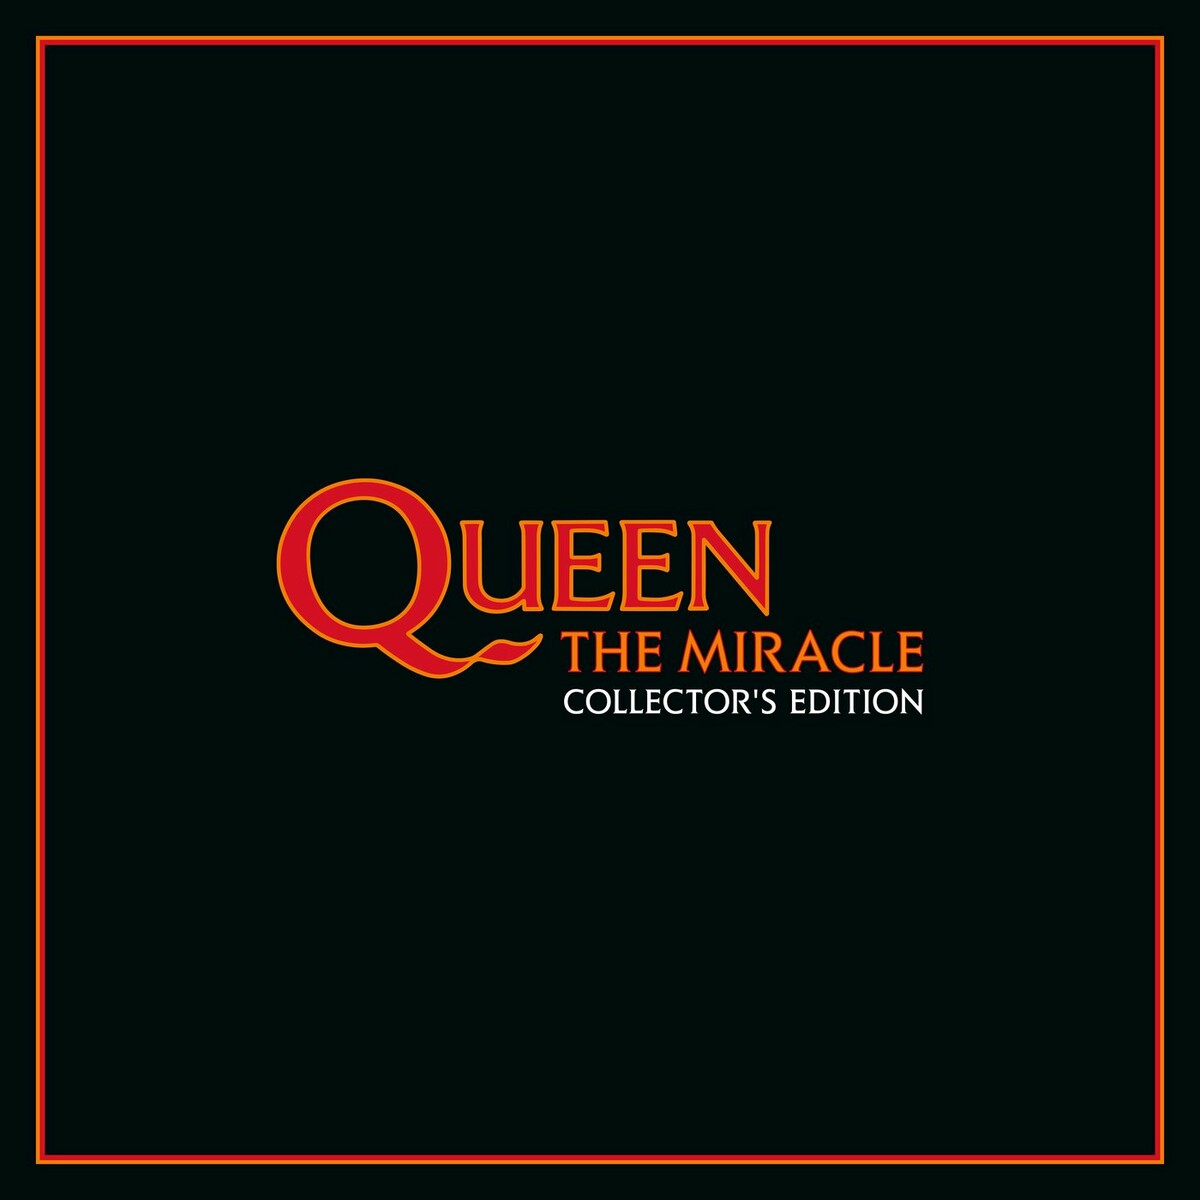 Queen - The Miracle (Collectors Edition) (2022) FLAC + MP3